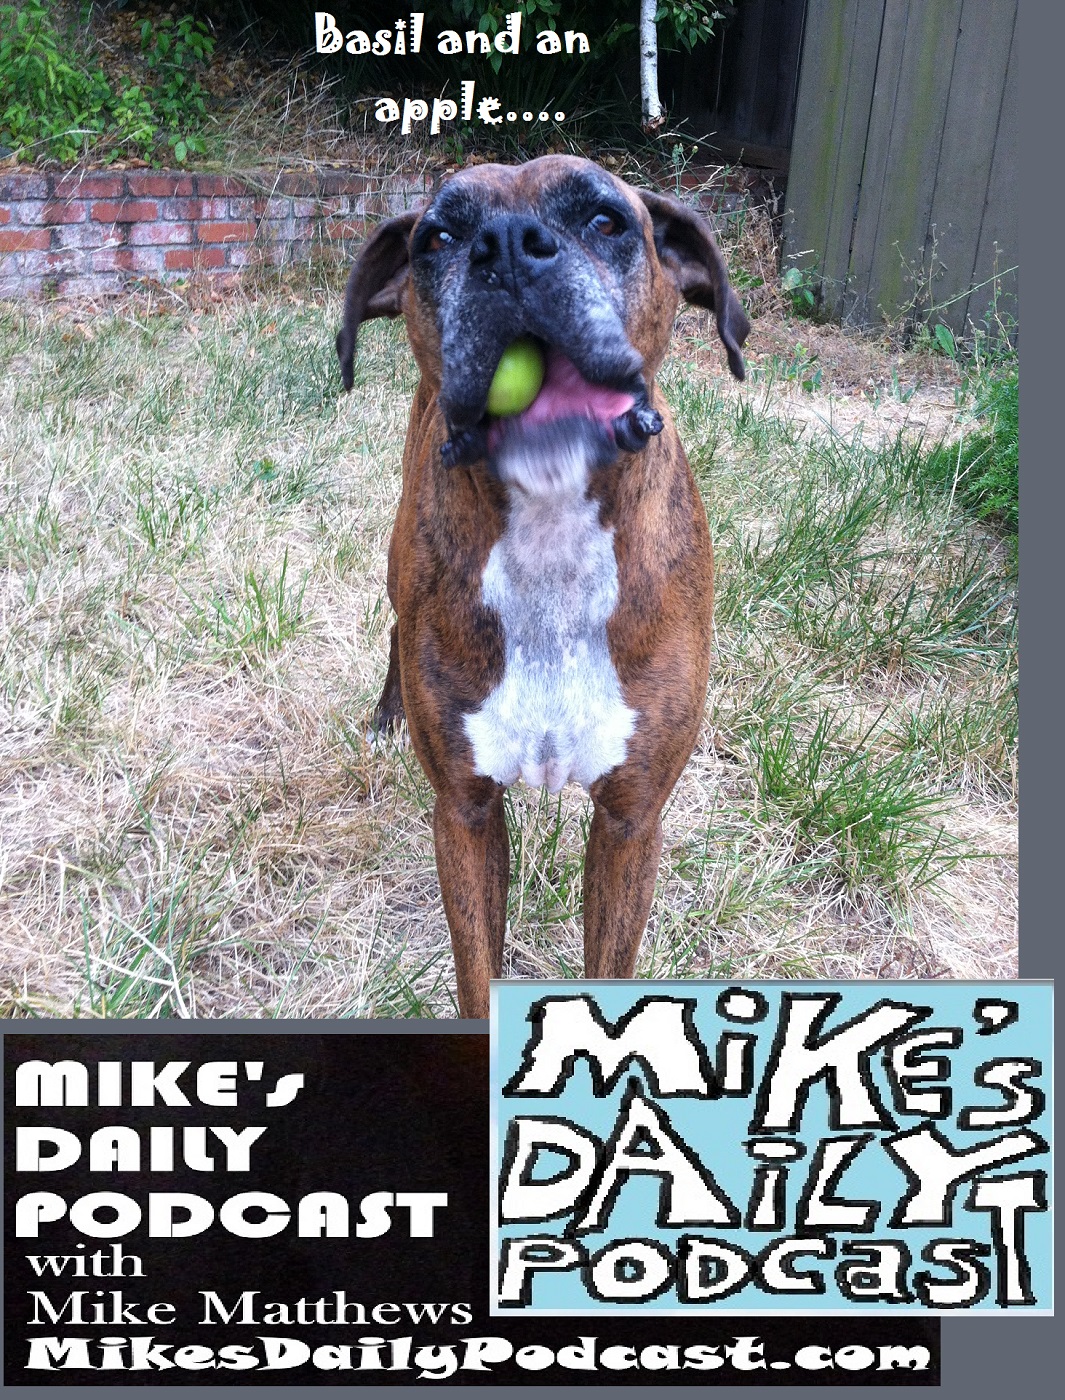 MIKEs DAILY PODCAST 1153 boxer eating apple